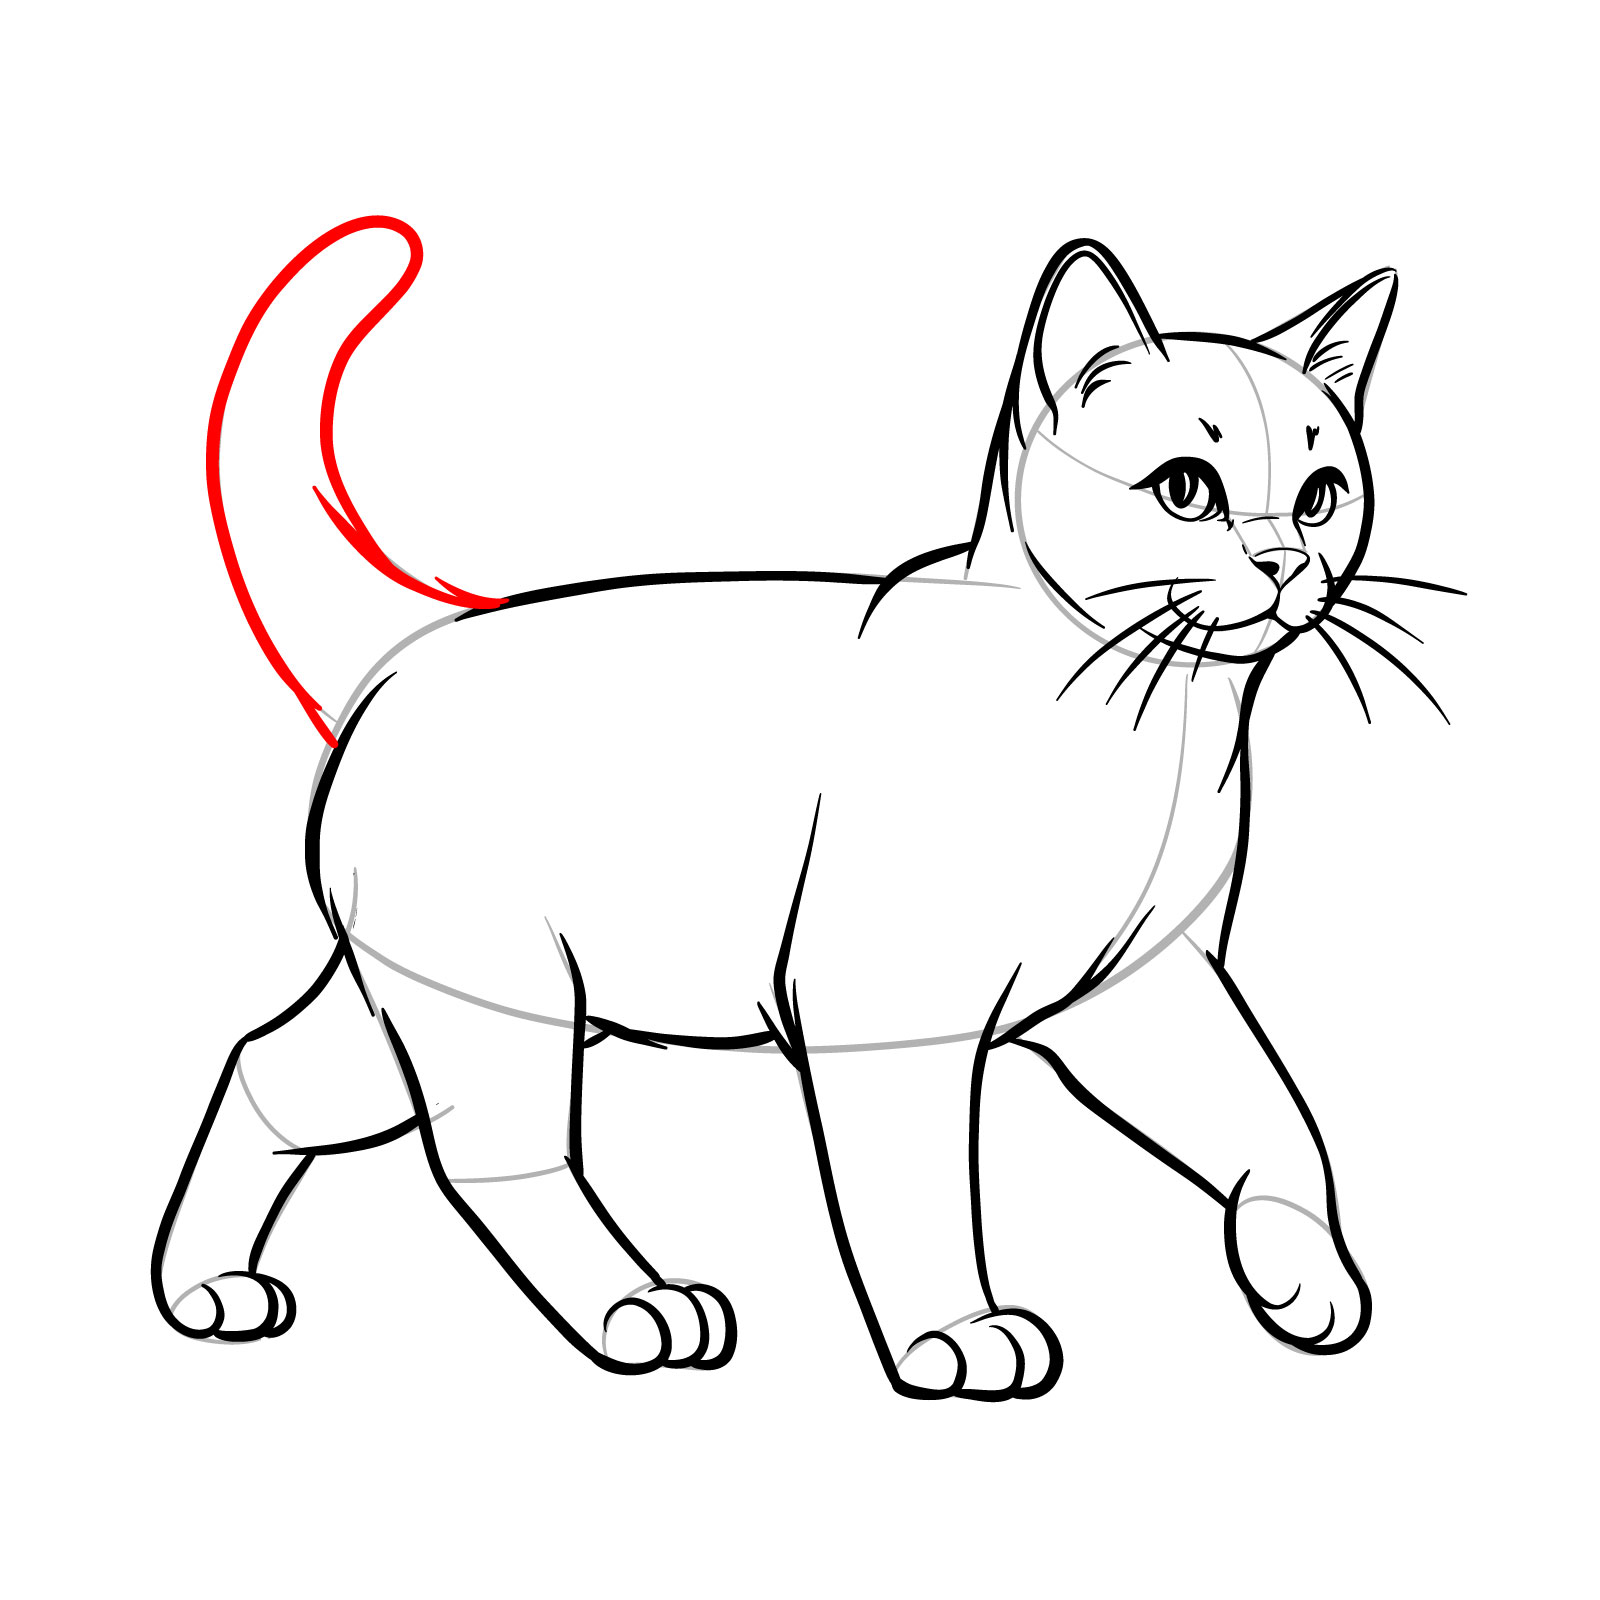 Drawing the fluid shape of the tail in a walking cat sketch - step 13